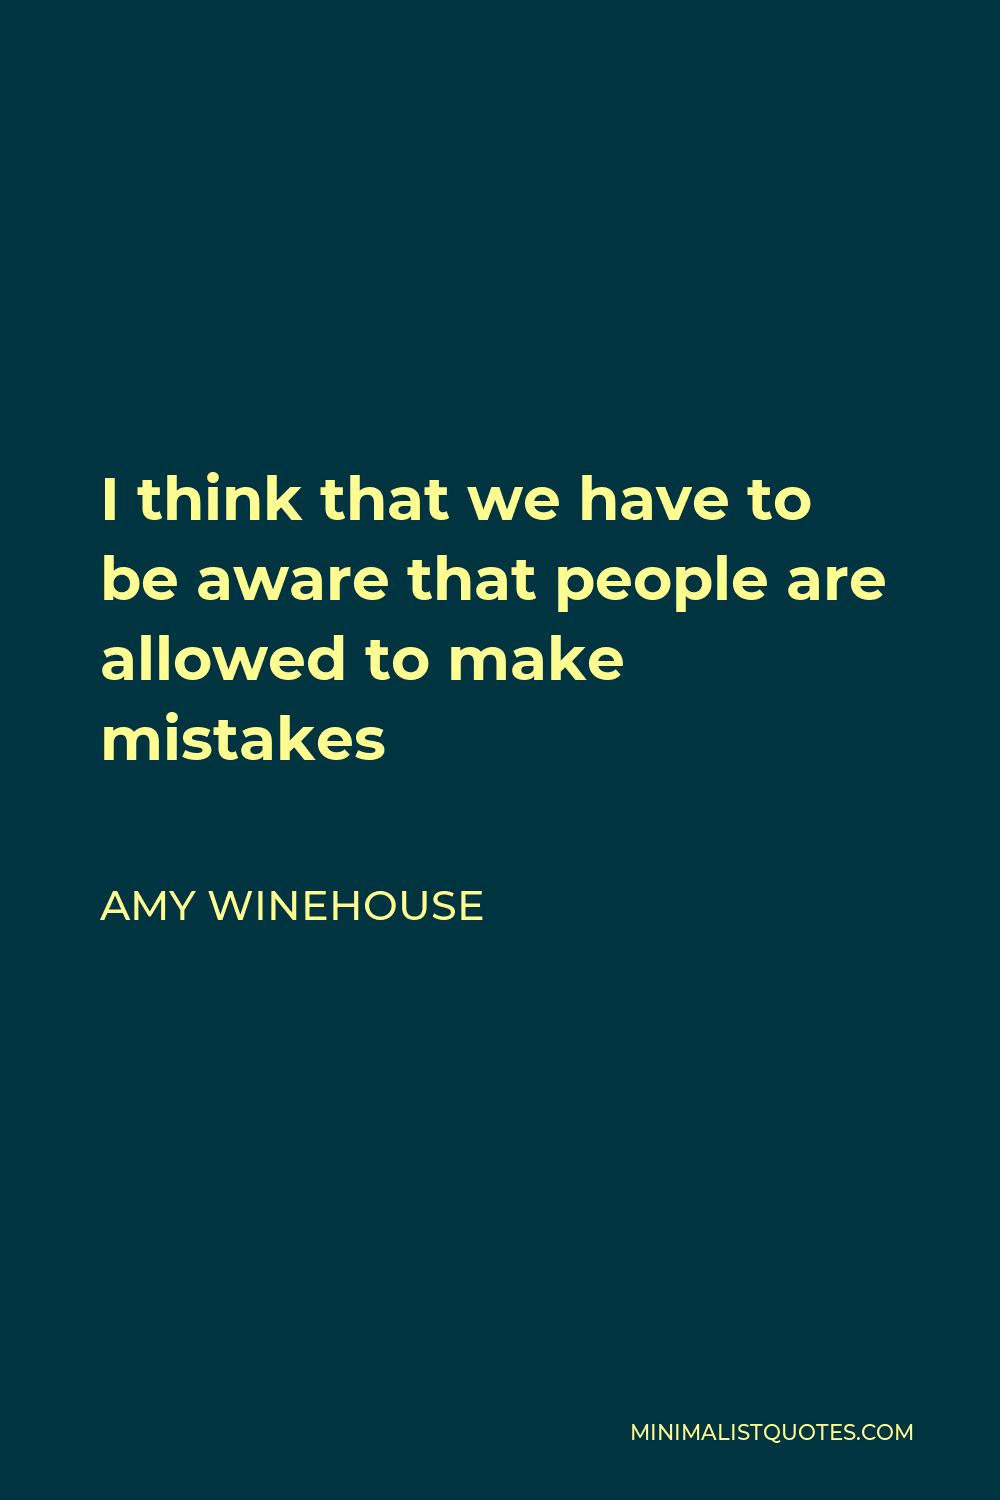 Amy Winehouse Quote - I think that we have to be aware that people are allowed to make mistakes